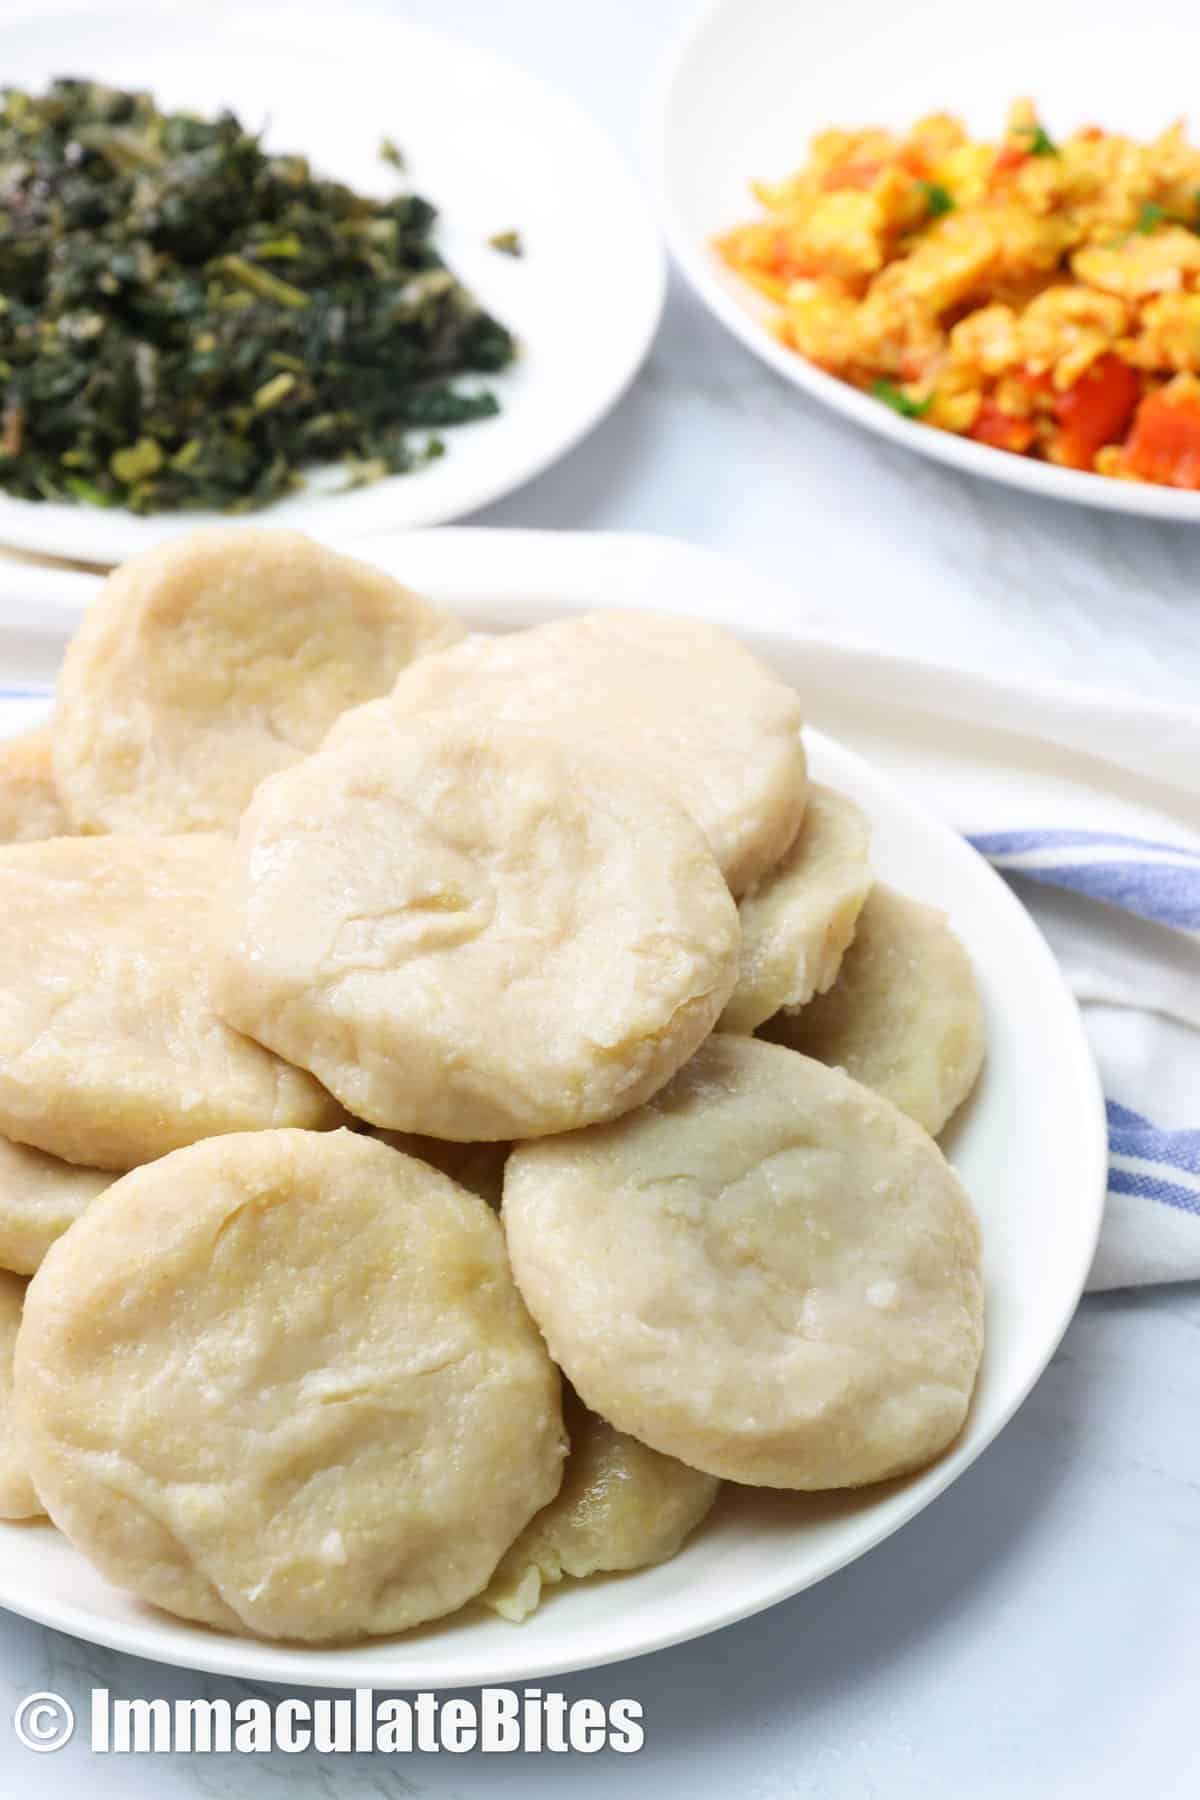 A plateful of Caribbiean boiled dumplings with side dishes